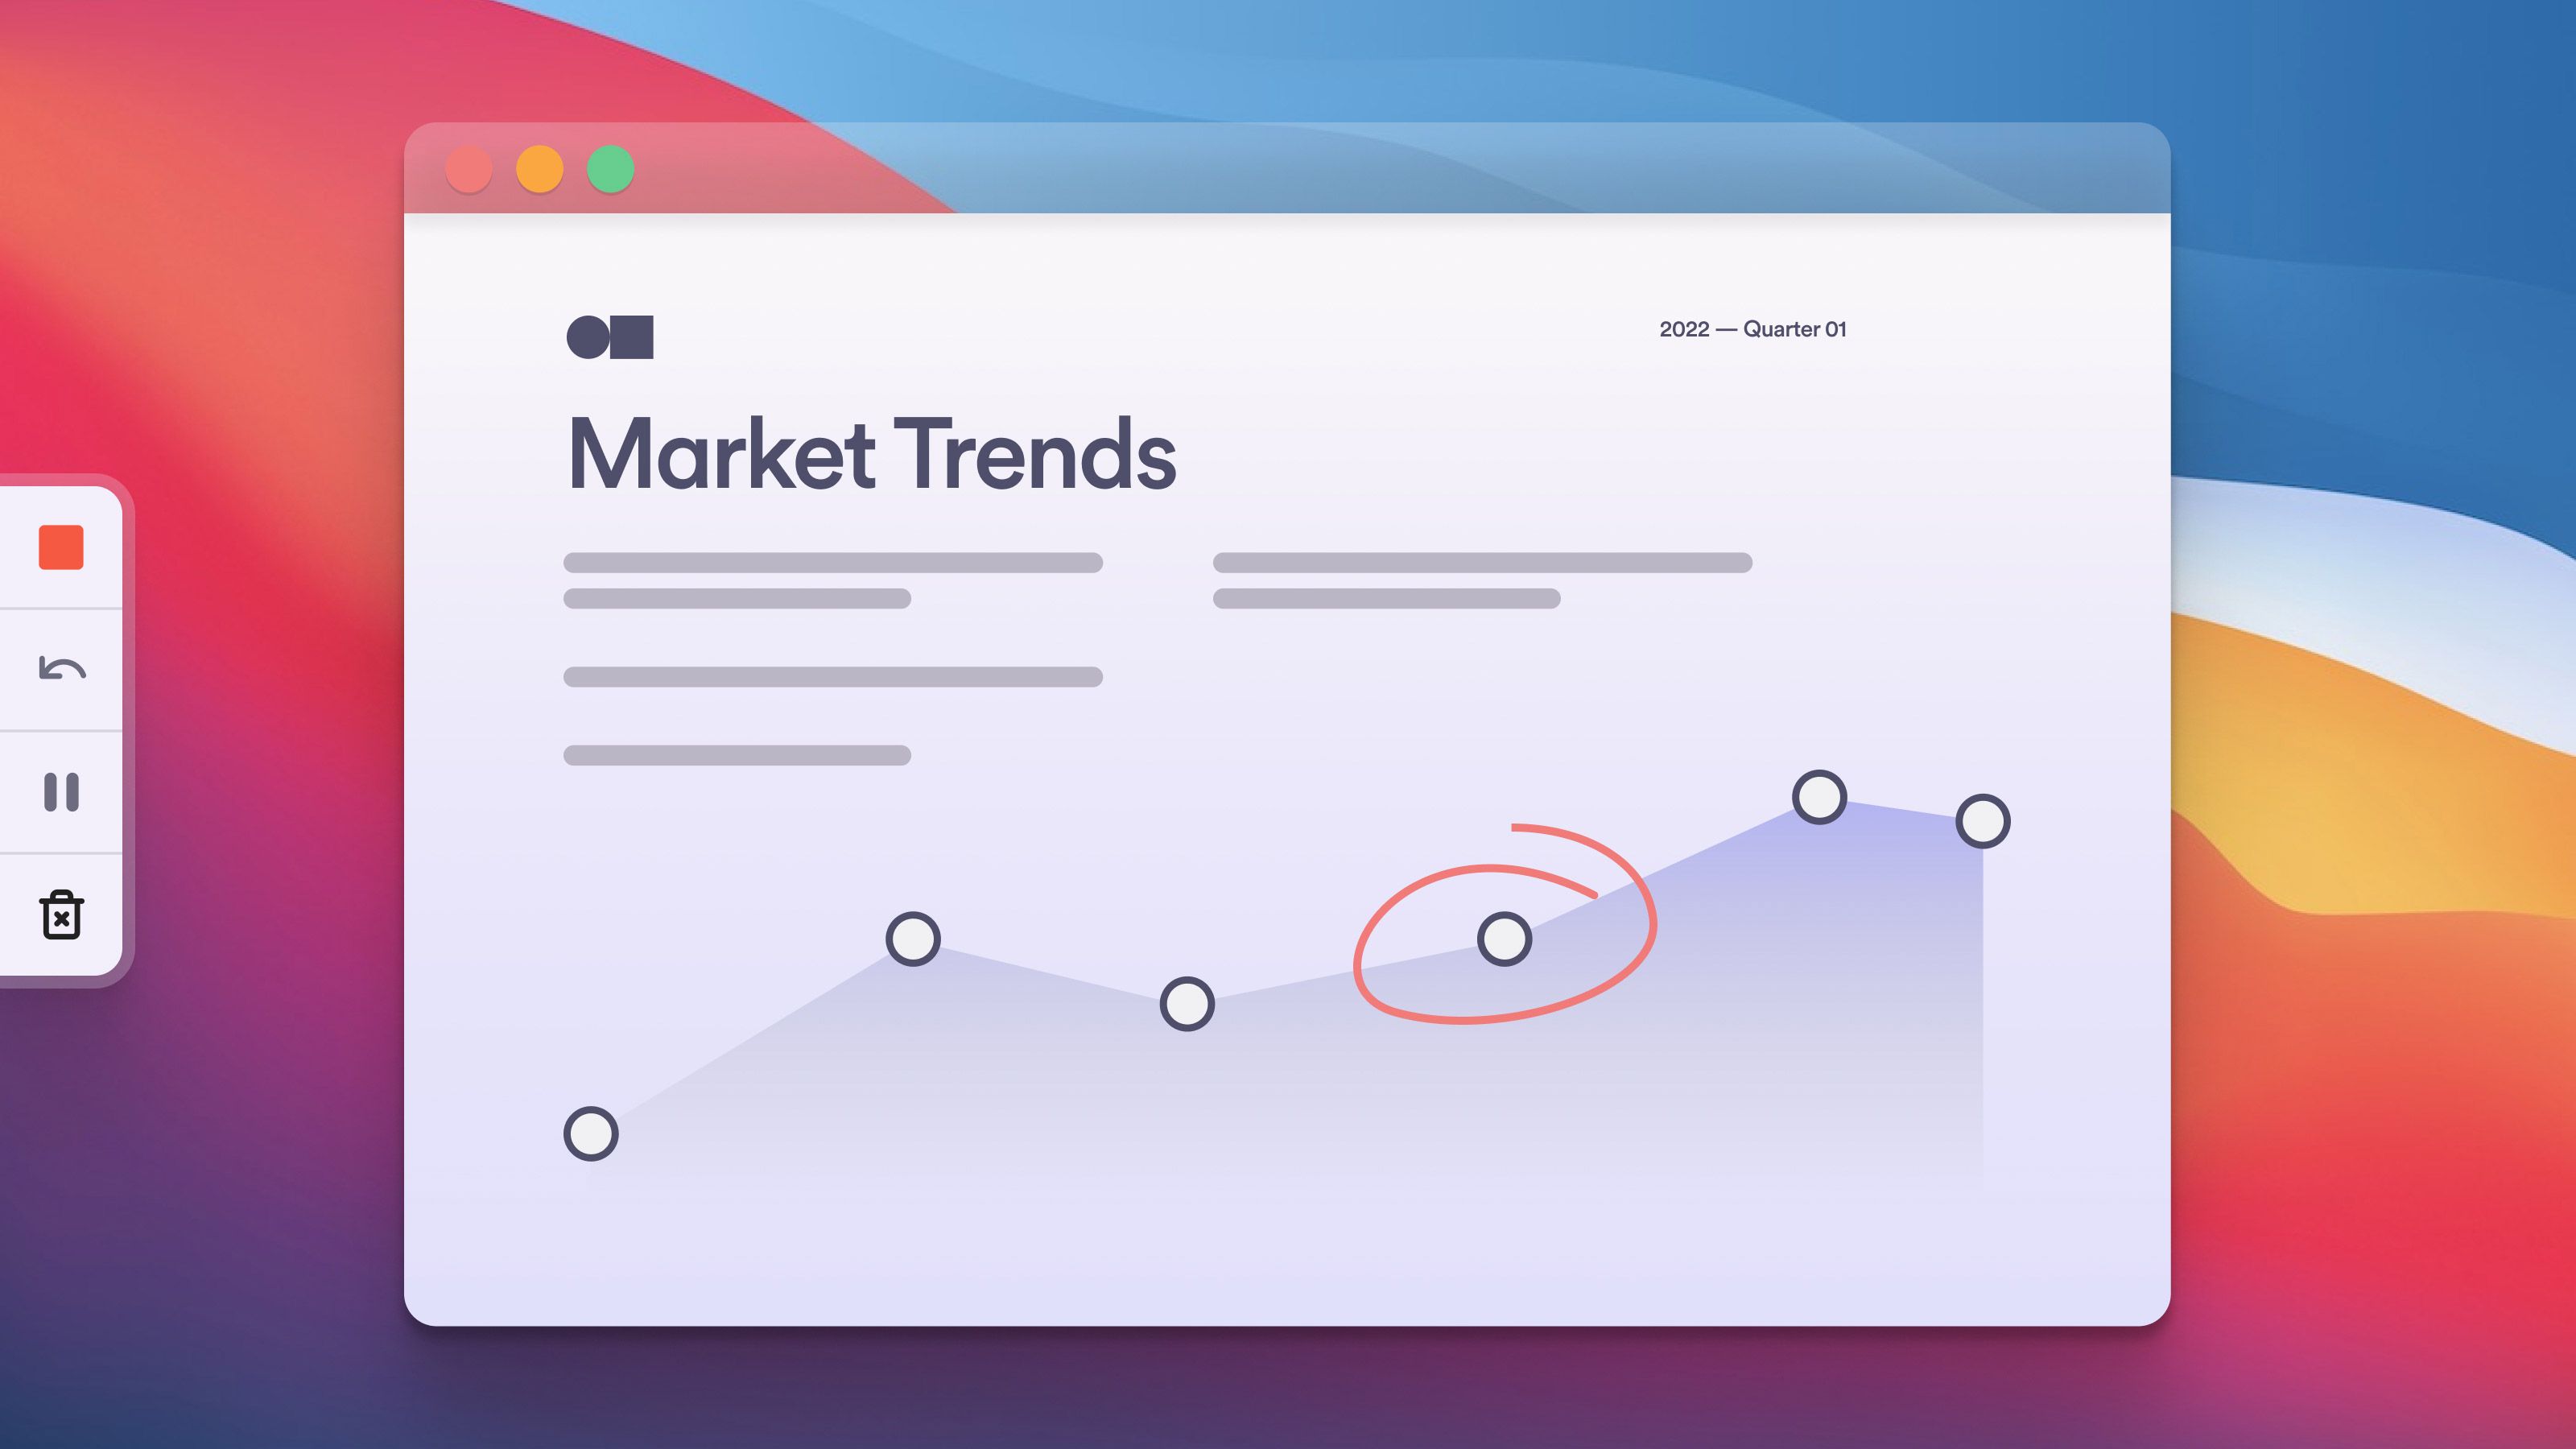 Sales team member walks through Market Trends using Loom, highlighting key areas with the tool.